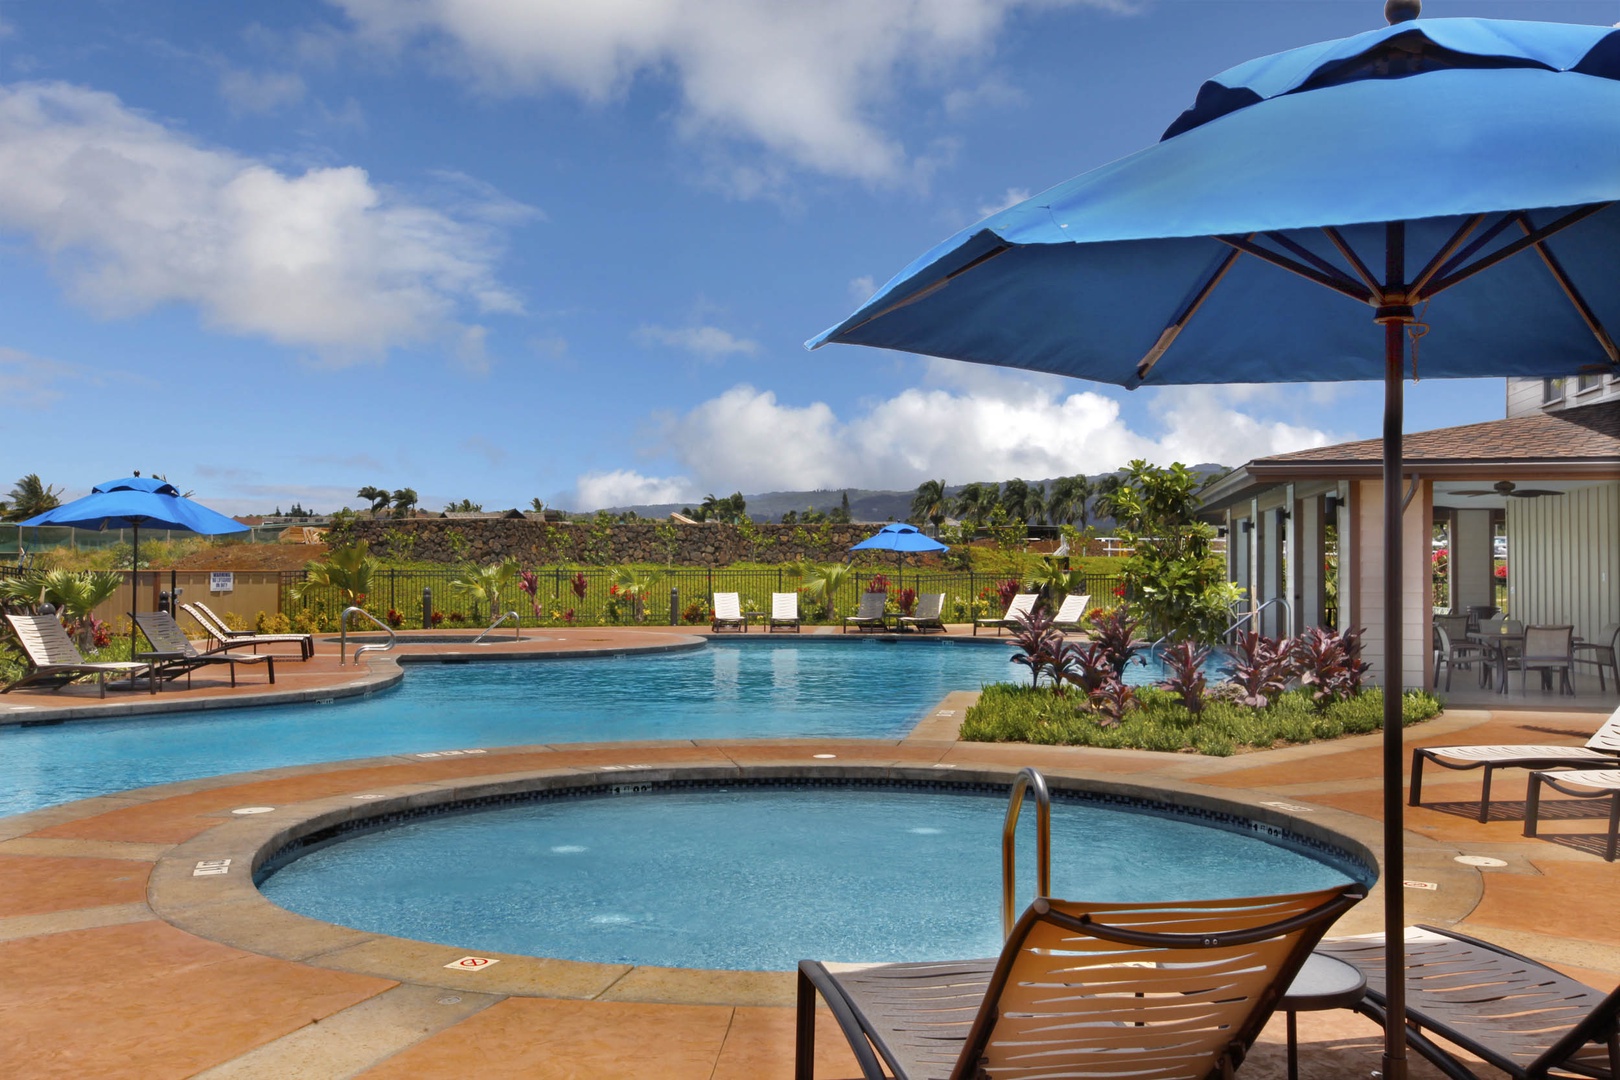 Koloa Vacation Rentals, Pili Mai 11K - The community hot tub is the perfect place to decompress